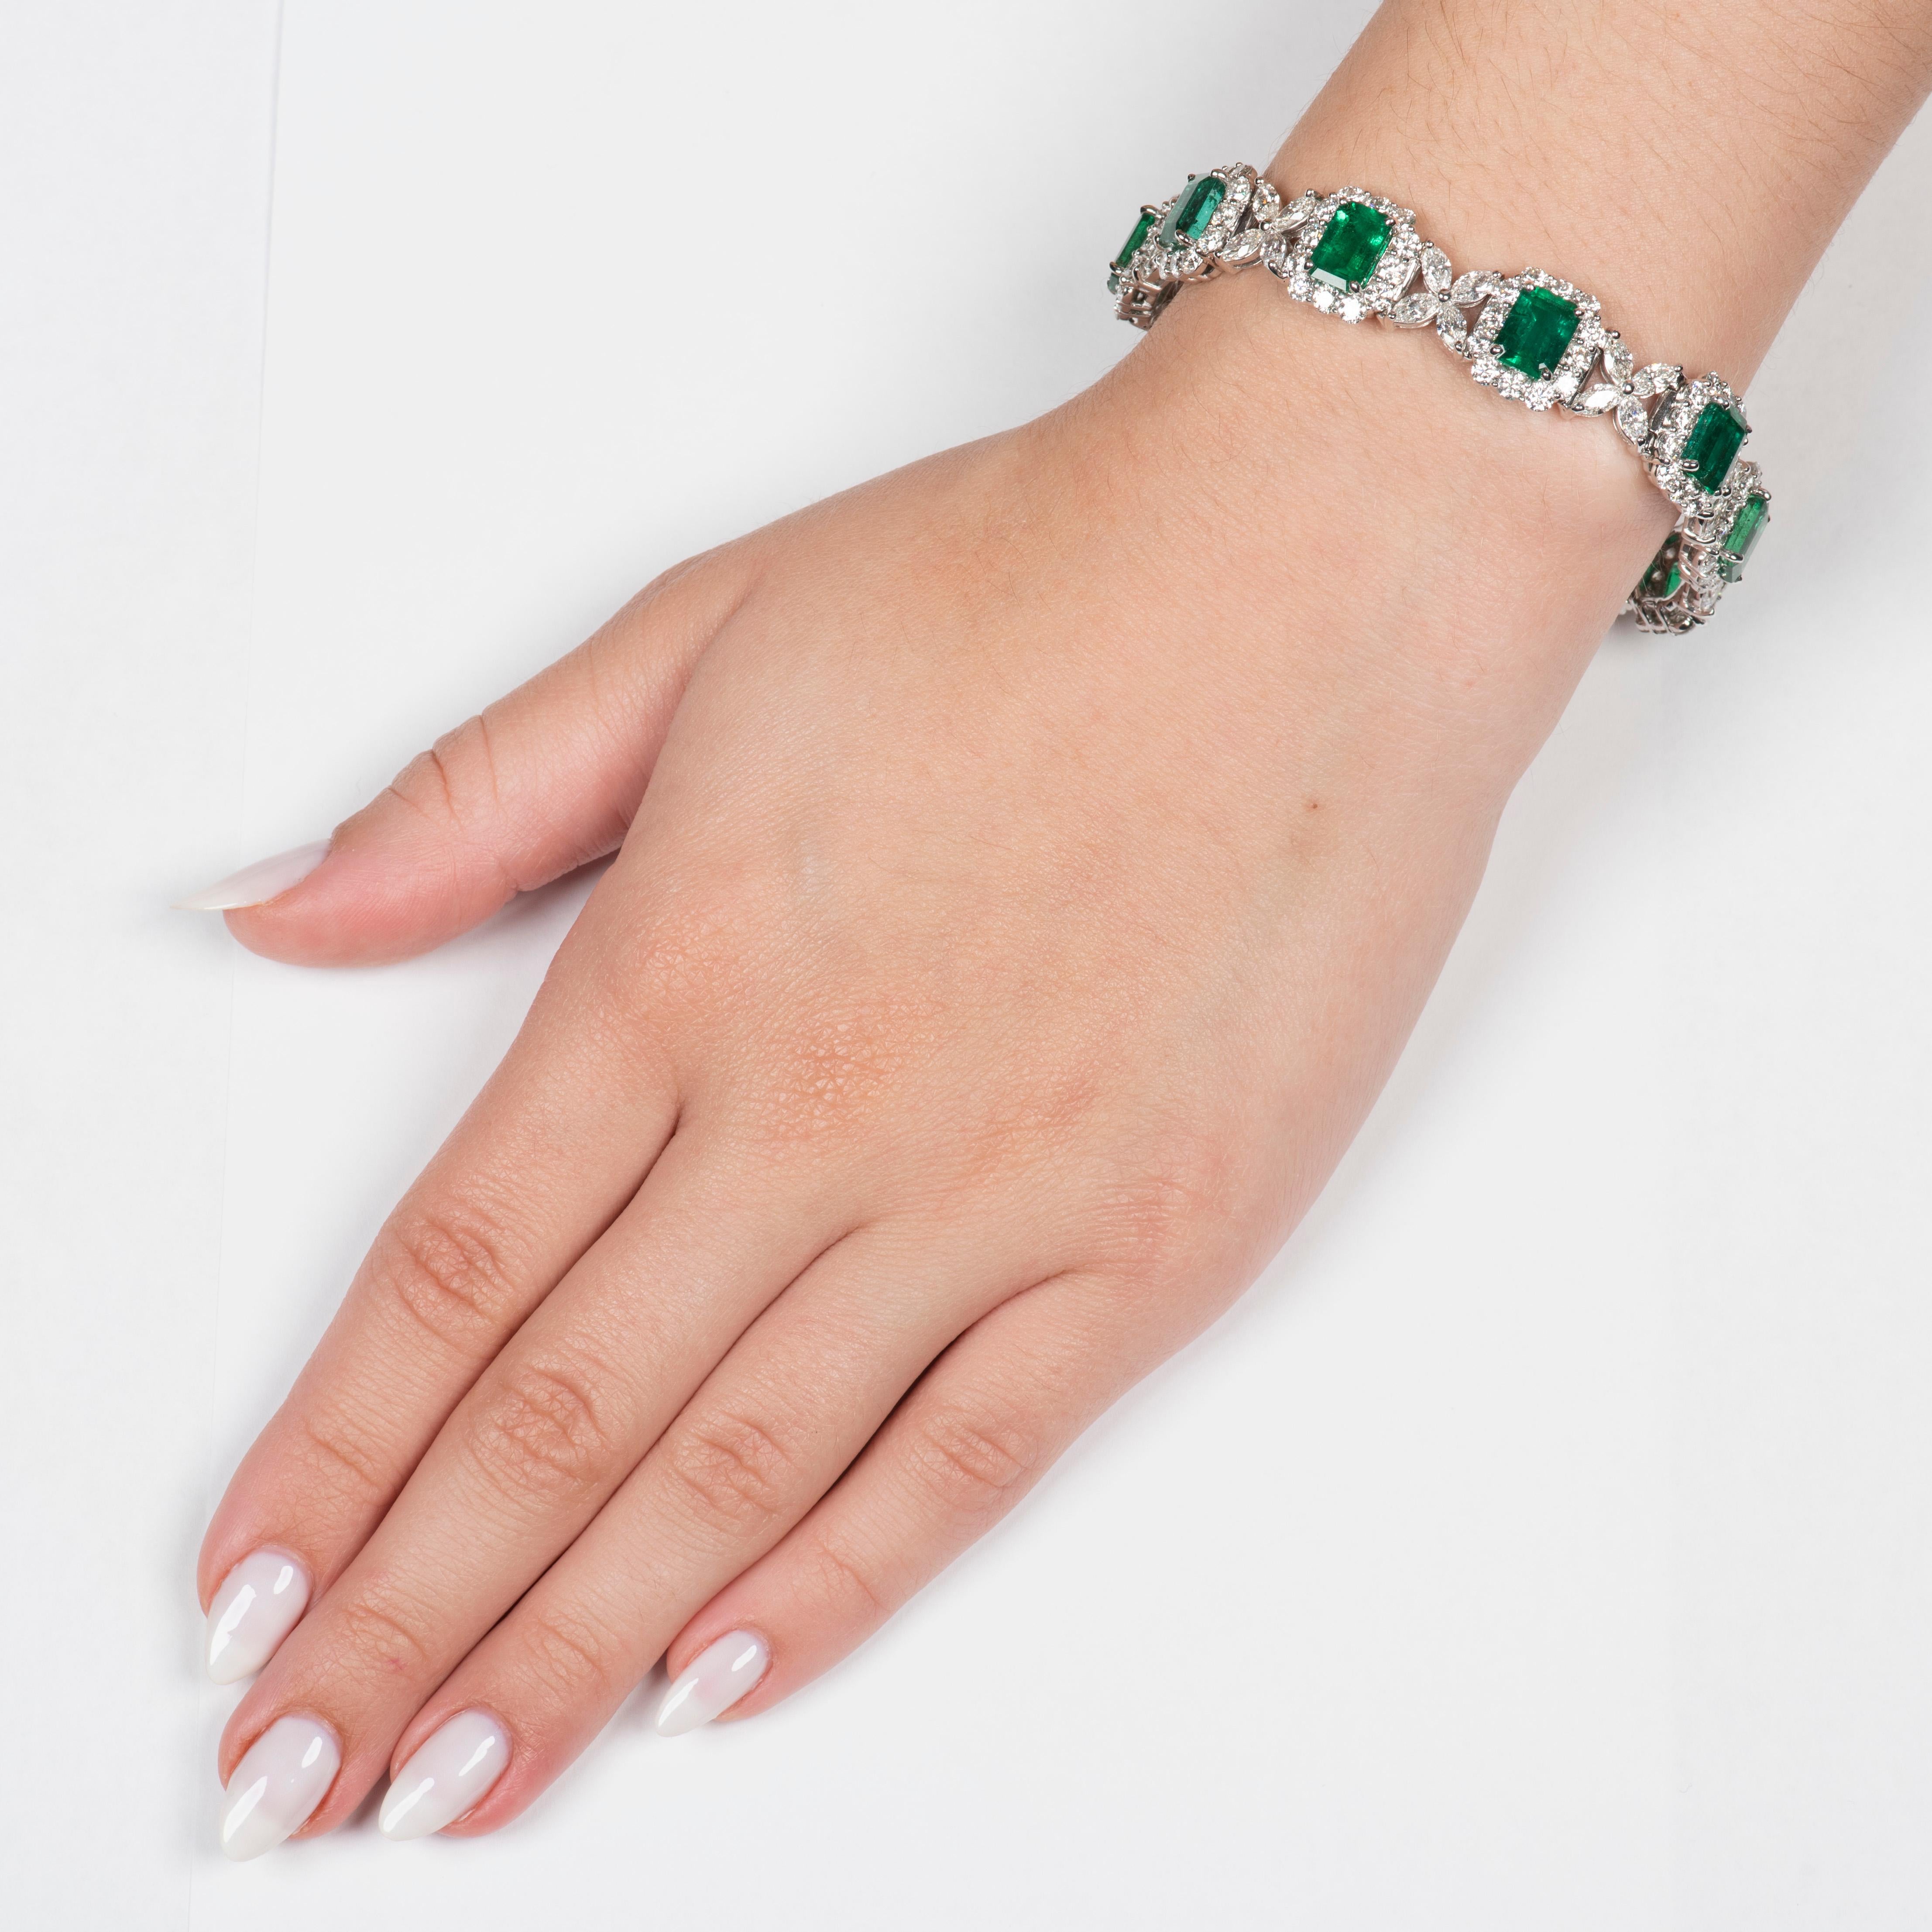 This incredible bracelet features 15.44ctw in emerald cut natural emeralds (total of 10), with 8.45ctw in diamonds, all set in 18kt white gold. The emeralds are a rich, vivid, medium green saturation and are very bright with great crystal. The